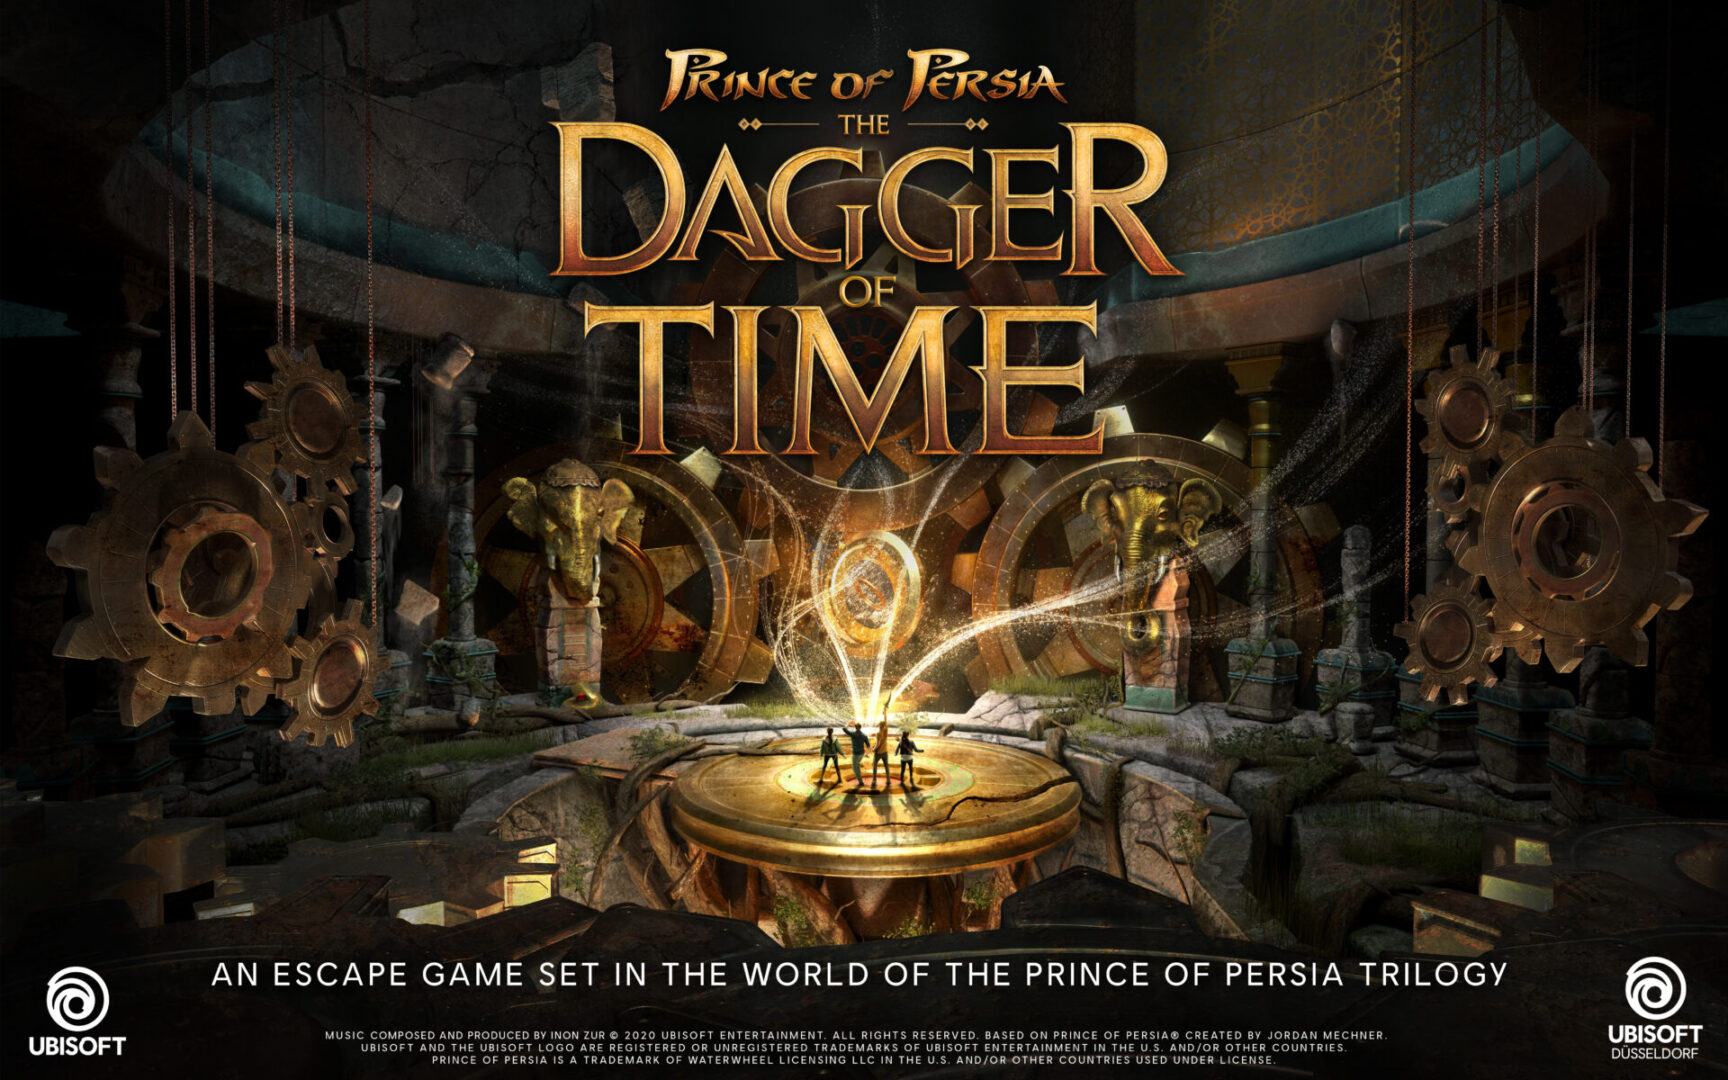 Prince of Persia: The Dagger Of Time is a Virtual Reality Escape Game set in the world of Prince of Persia which enables you to experience time control. You will be able to experience something impossible in real life: to slow, stop or even rewind time.